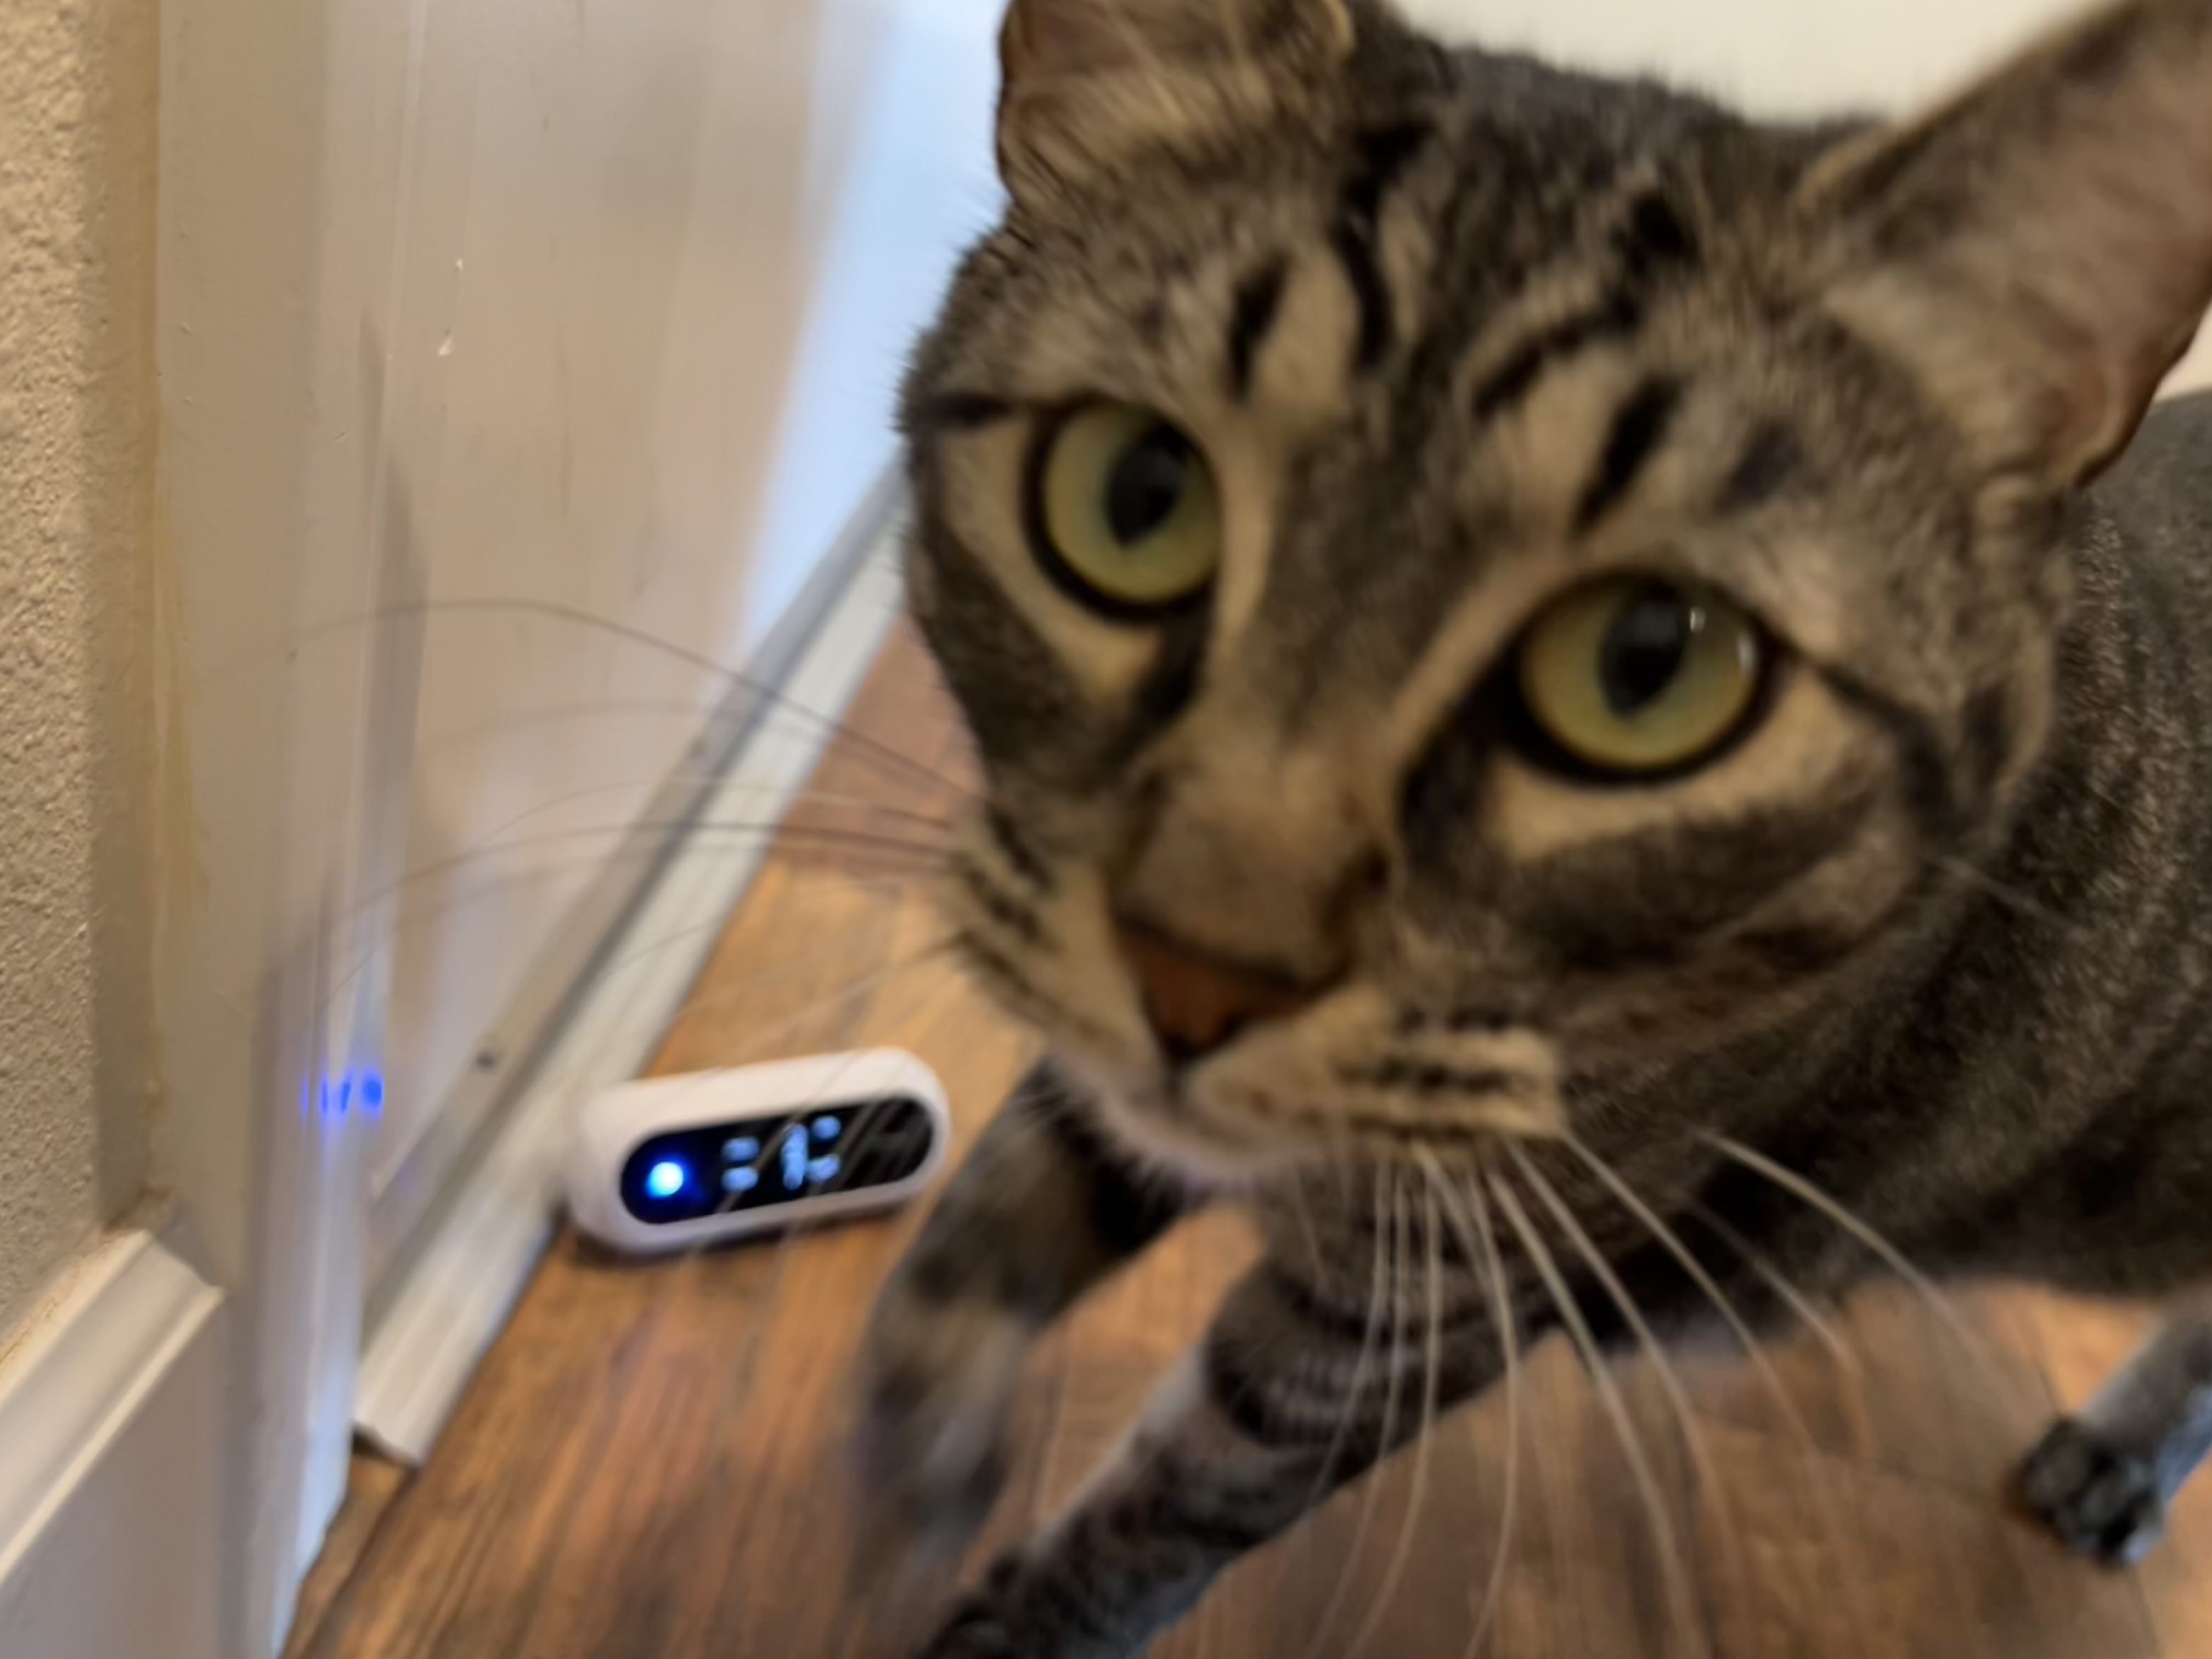 A cat sticking it's face toward the phone camera. Behind the cat, a portable PM 2.5 / PM 10 air monitor sits on the floor by a door to measure incoming air.